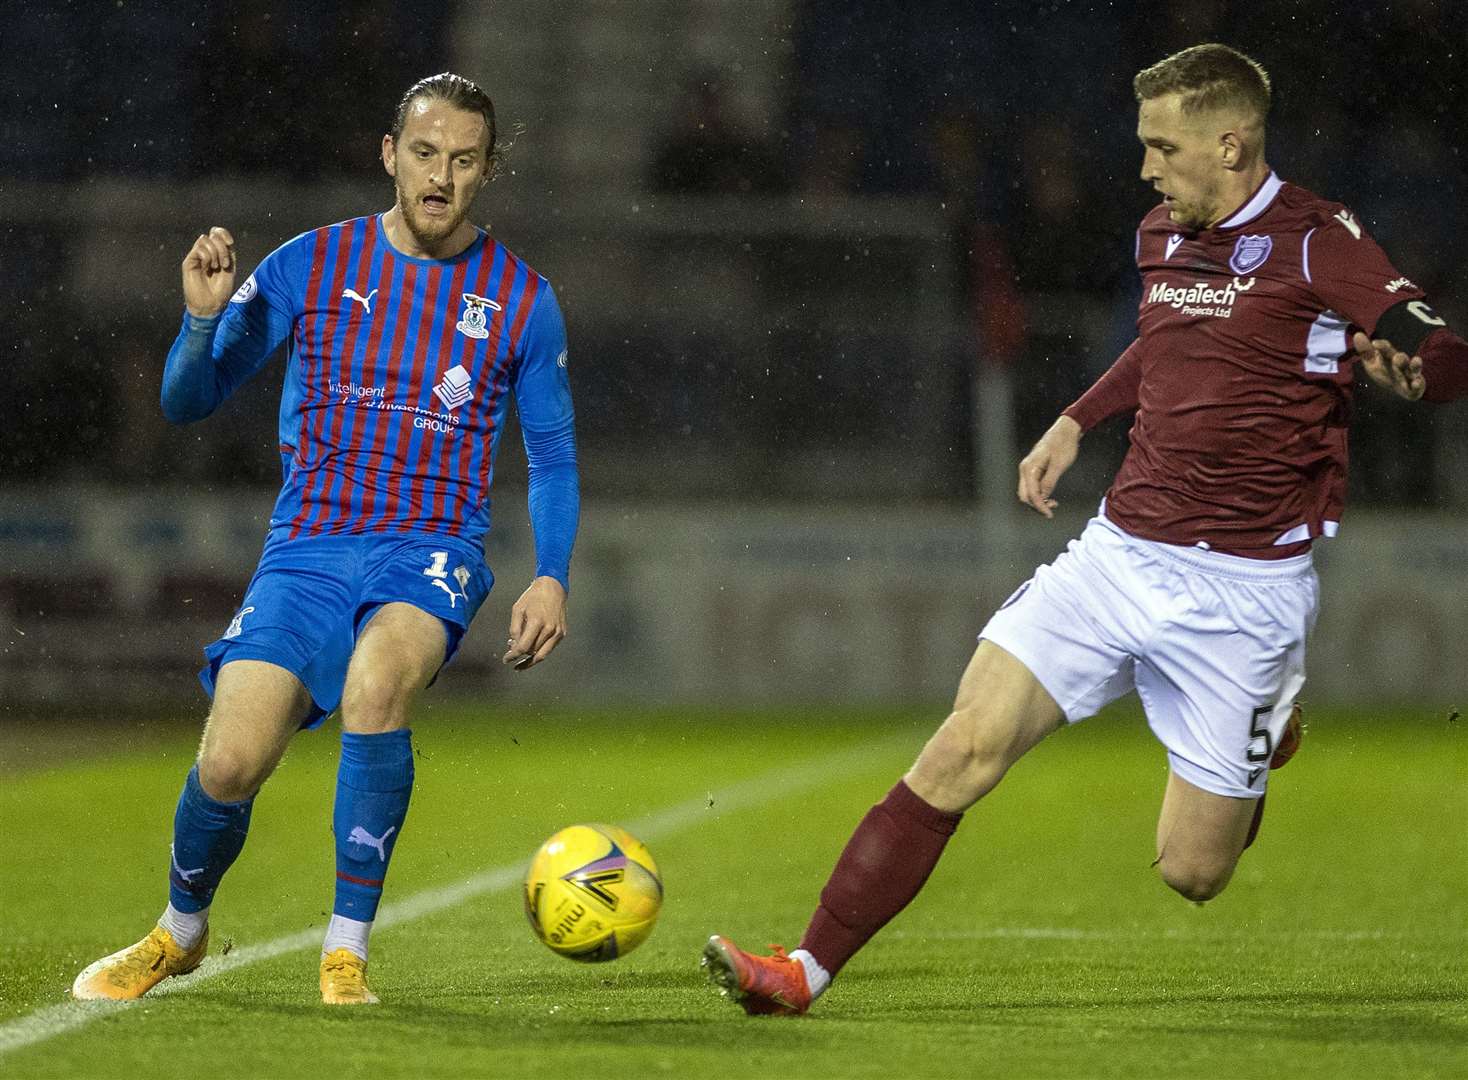 Walsh evades Arbroath’s Thomas O’Brien to deliver a cross on Tuesday. Picture: Ken Macpherson